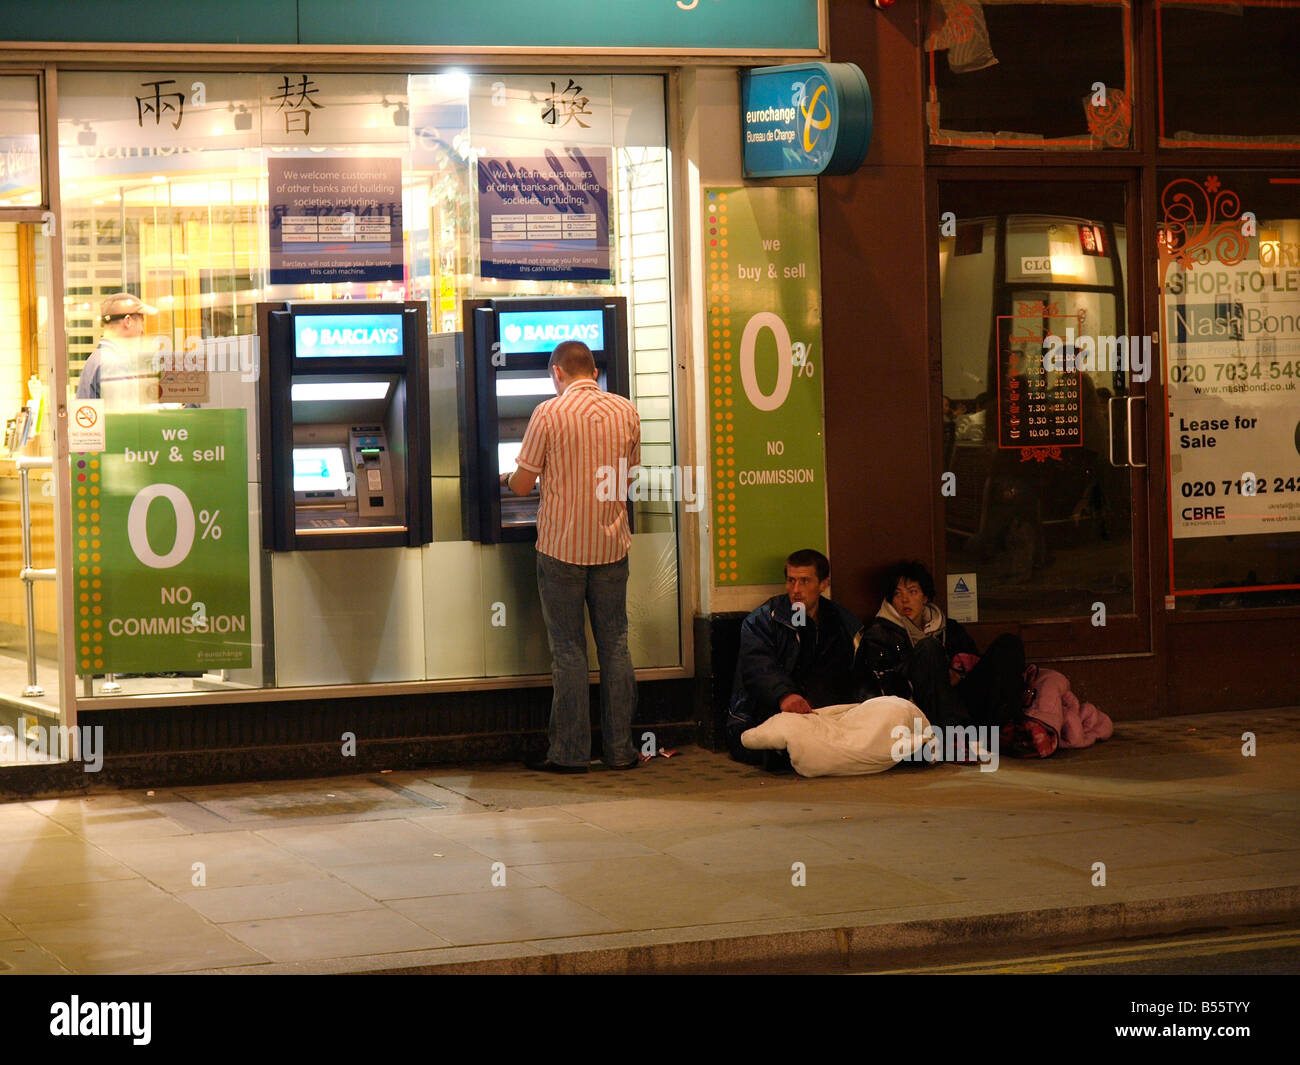 Financial crisis, hard times for some in 2008. Man getting cash from a Barclays ATM with beggars sitting next to it London UK Stock Photo